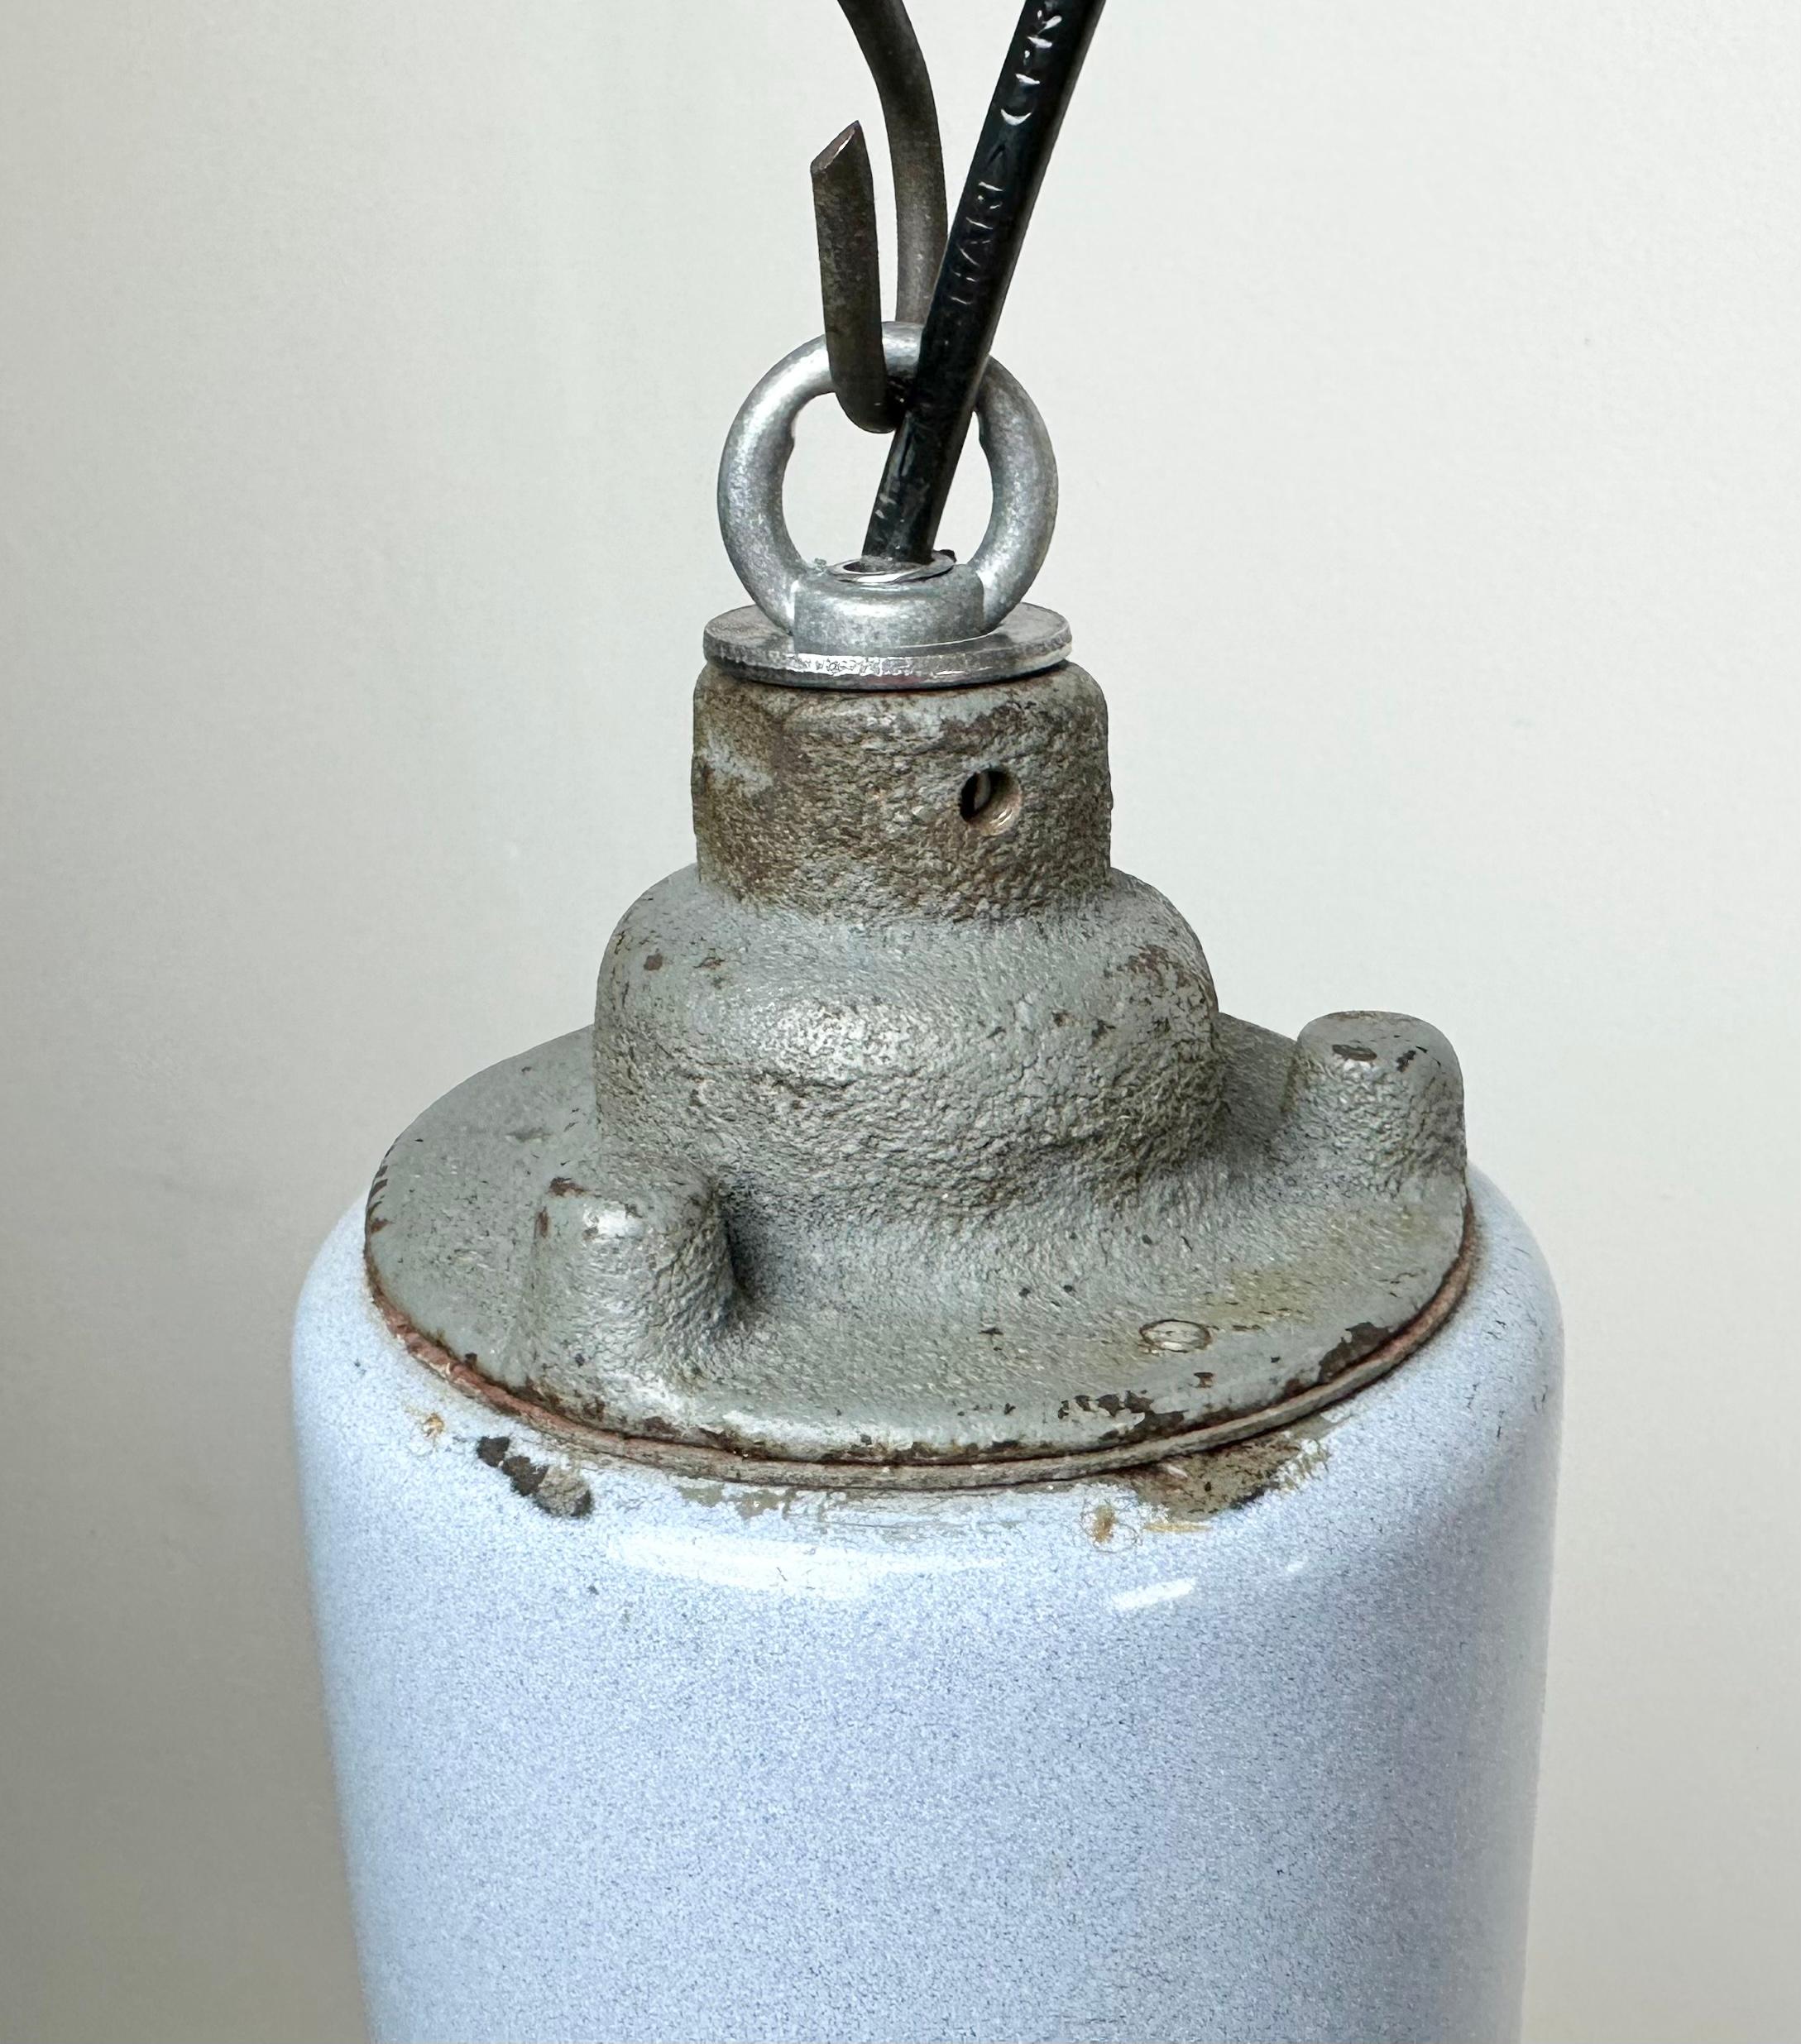 Bauhaus Grey Enamel Industrial Pendant Lamp with Glass Cover, 1950s For Sale 2